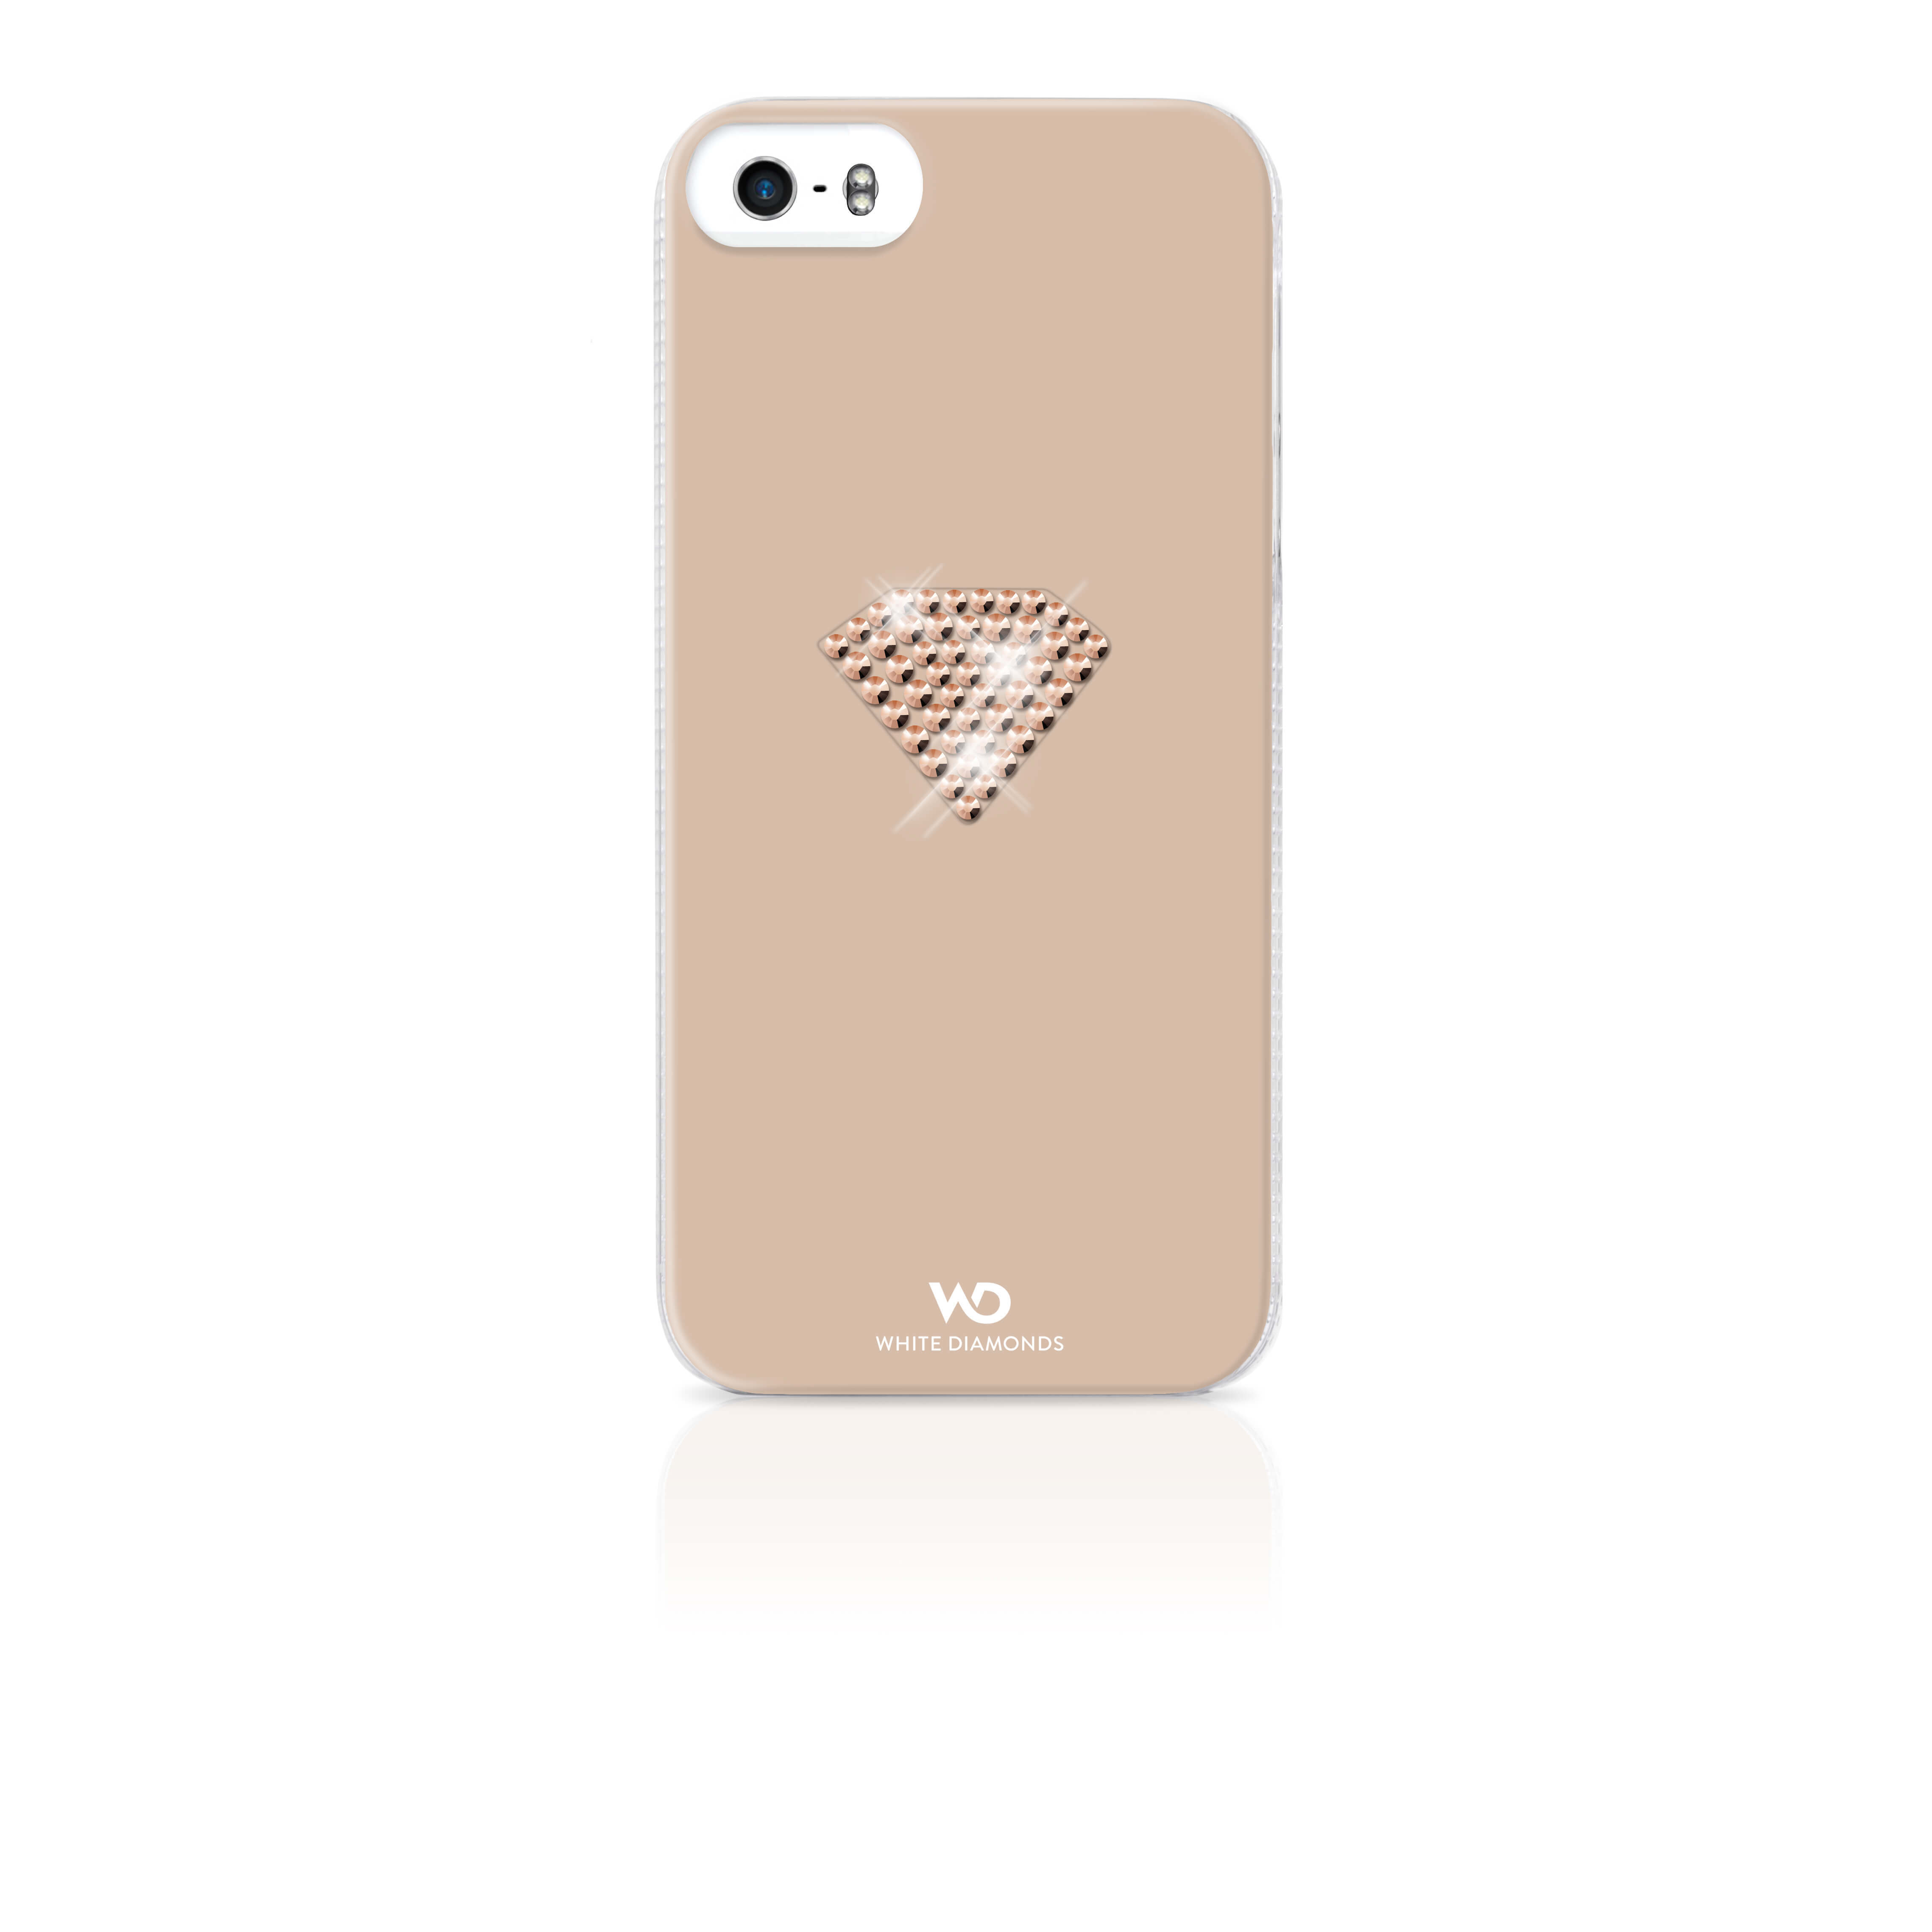 Rainbow Mobile Phone Cover iPhone 5/5s/SE, rose gold